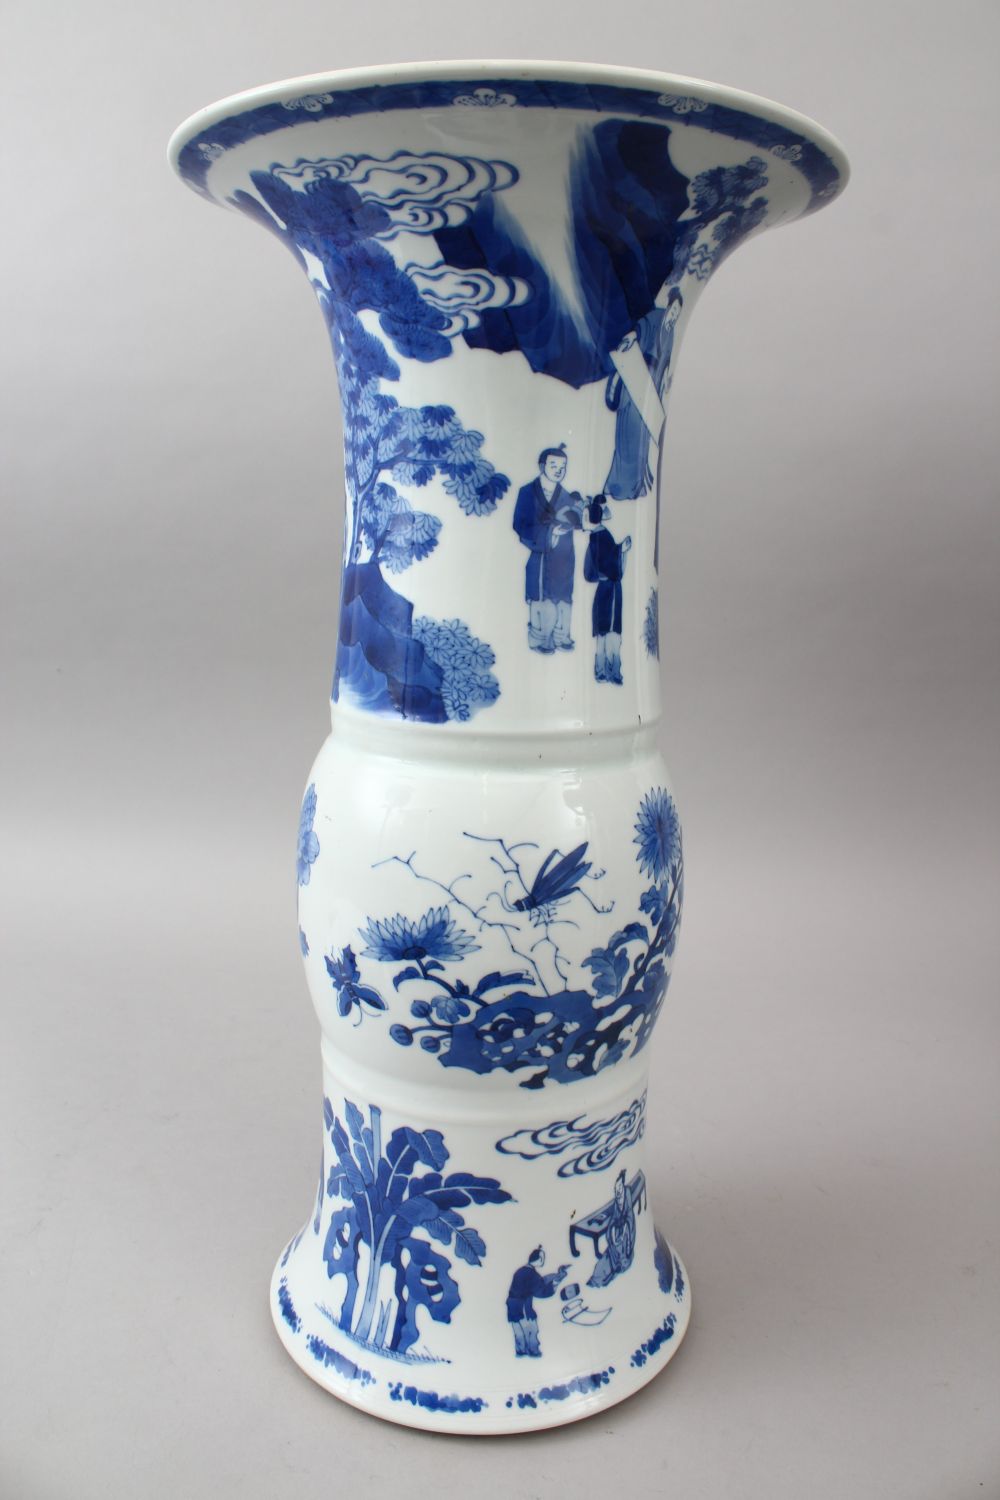 A LARGE CHINESE BLUE & WHITE PORCELAIN YEN YEN VASE, the body of the vase decorated with scenes of - Image 4 of 7